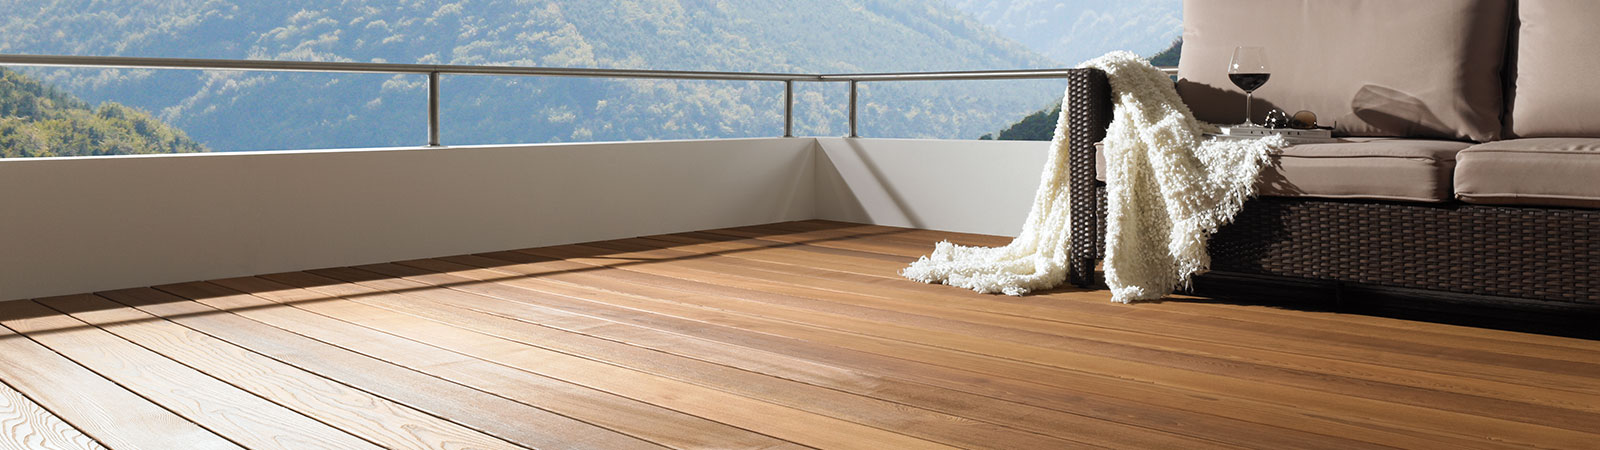 Osmo decking - thermowood for long-lasting garden deck